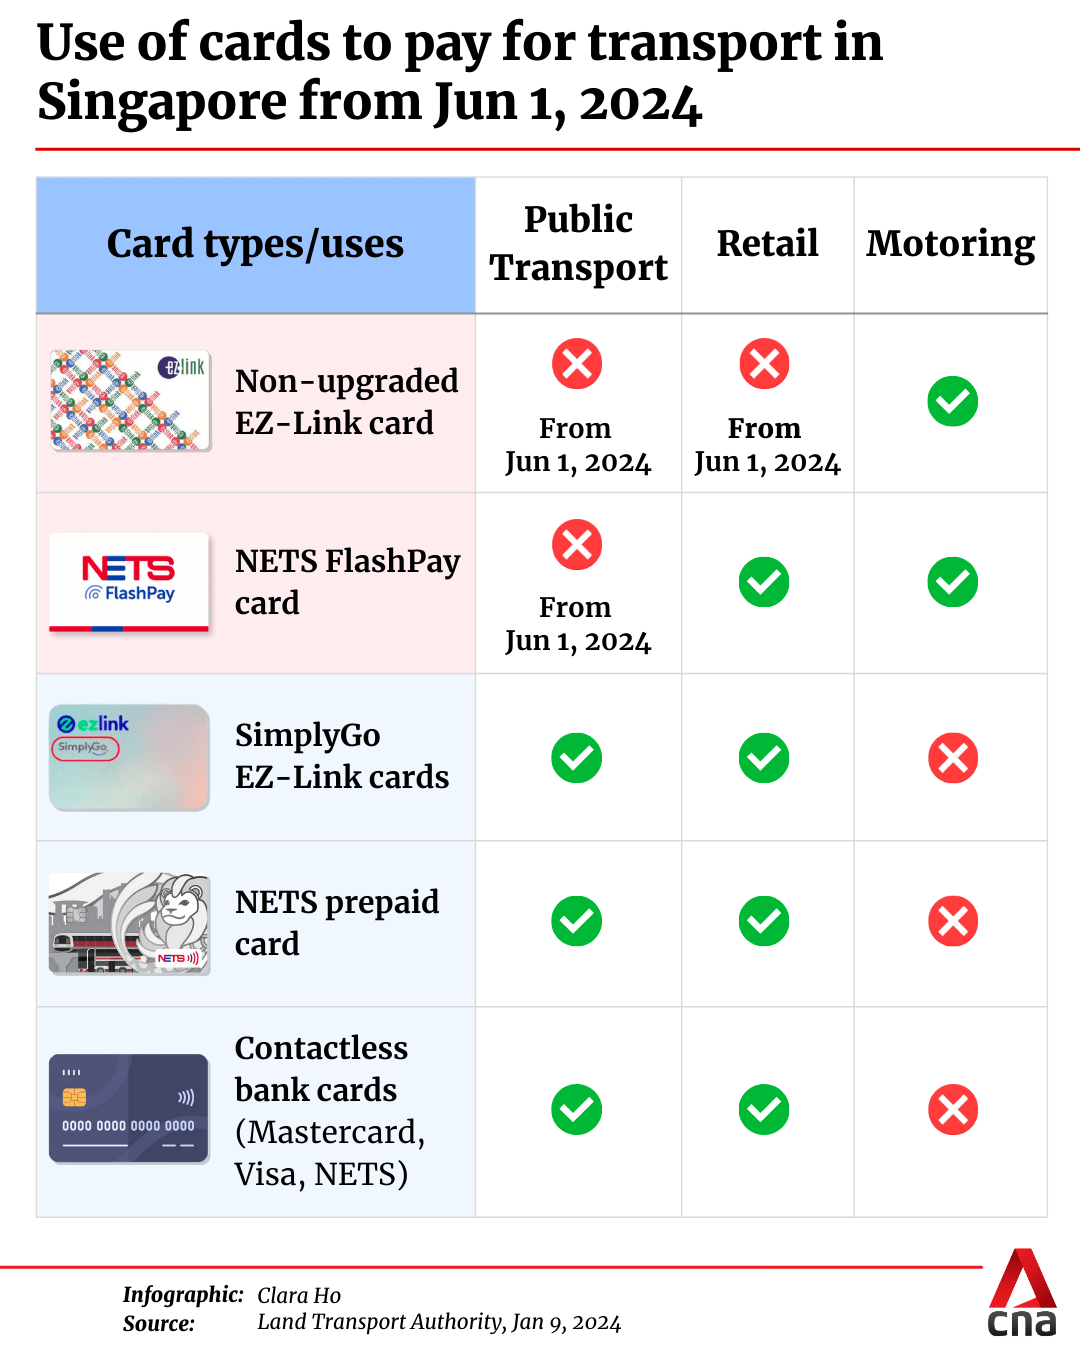 Non-SimplyGo EZ-Link, NETS FlashPay cards not valid for public transport  from June - CNA